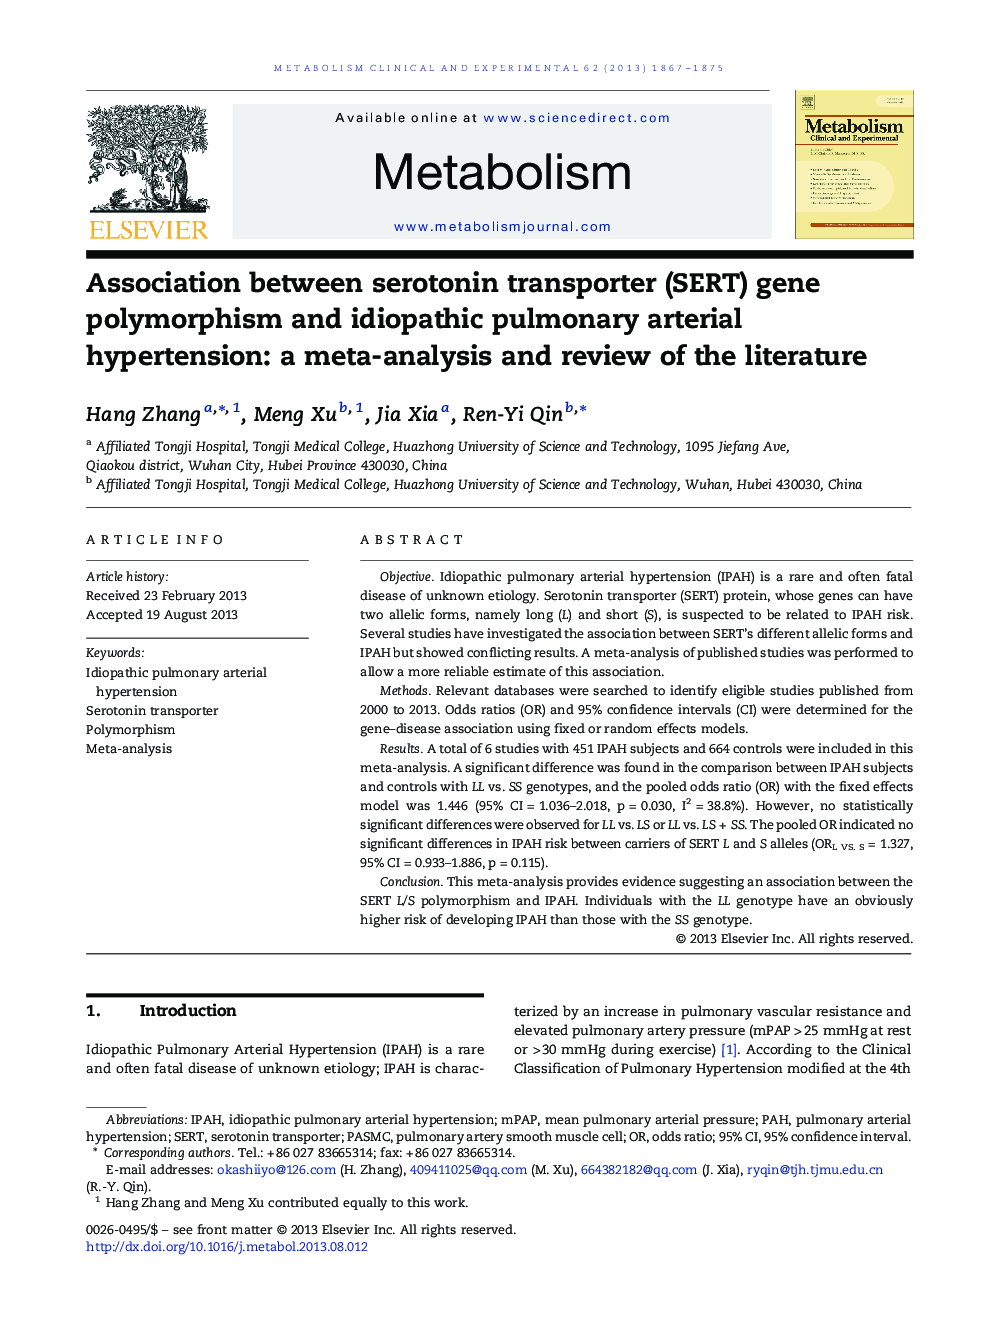 Association between serotonin transporter (SERT) gene polymorphism and idiopathic pulmonary arterial hypertension: a meta-analysis and review of the literature